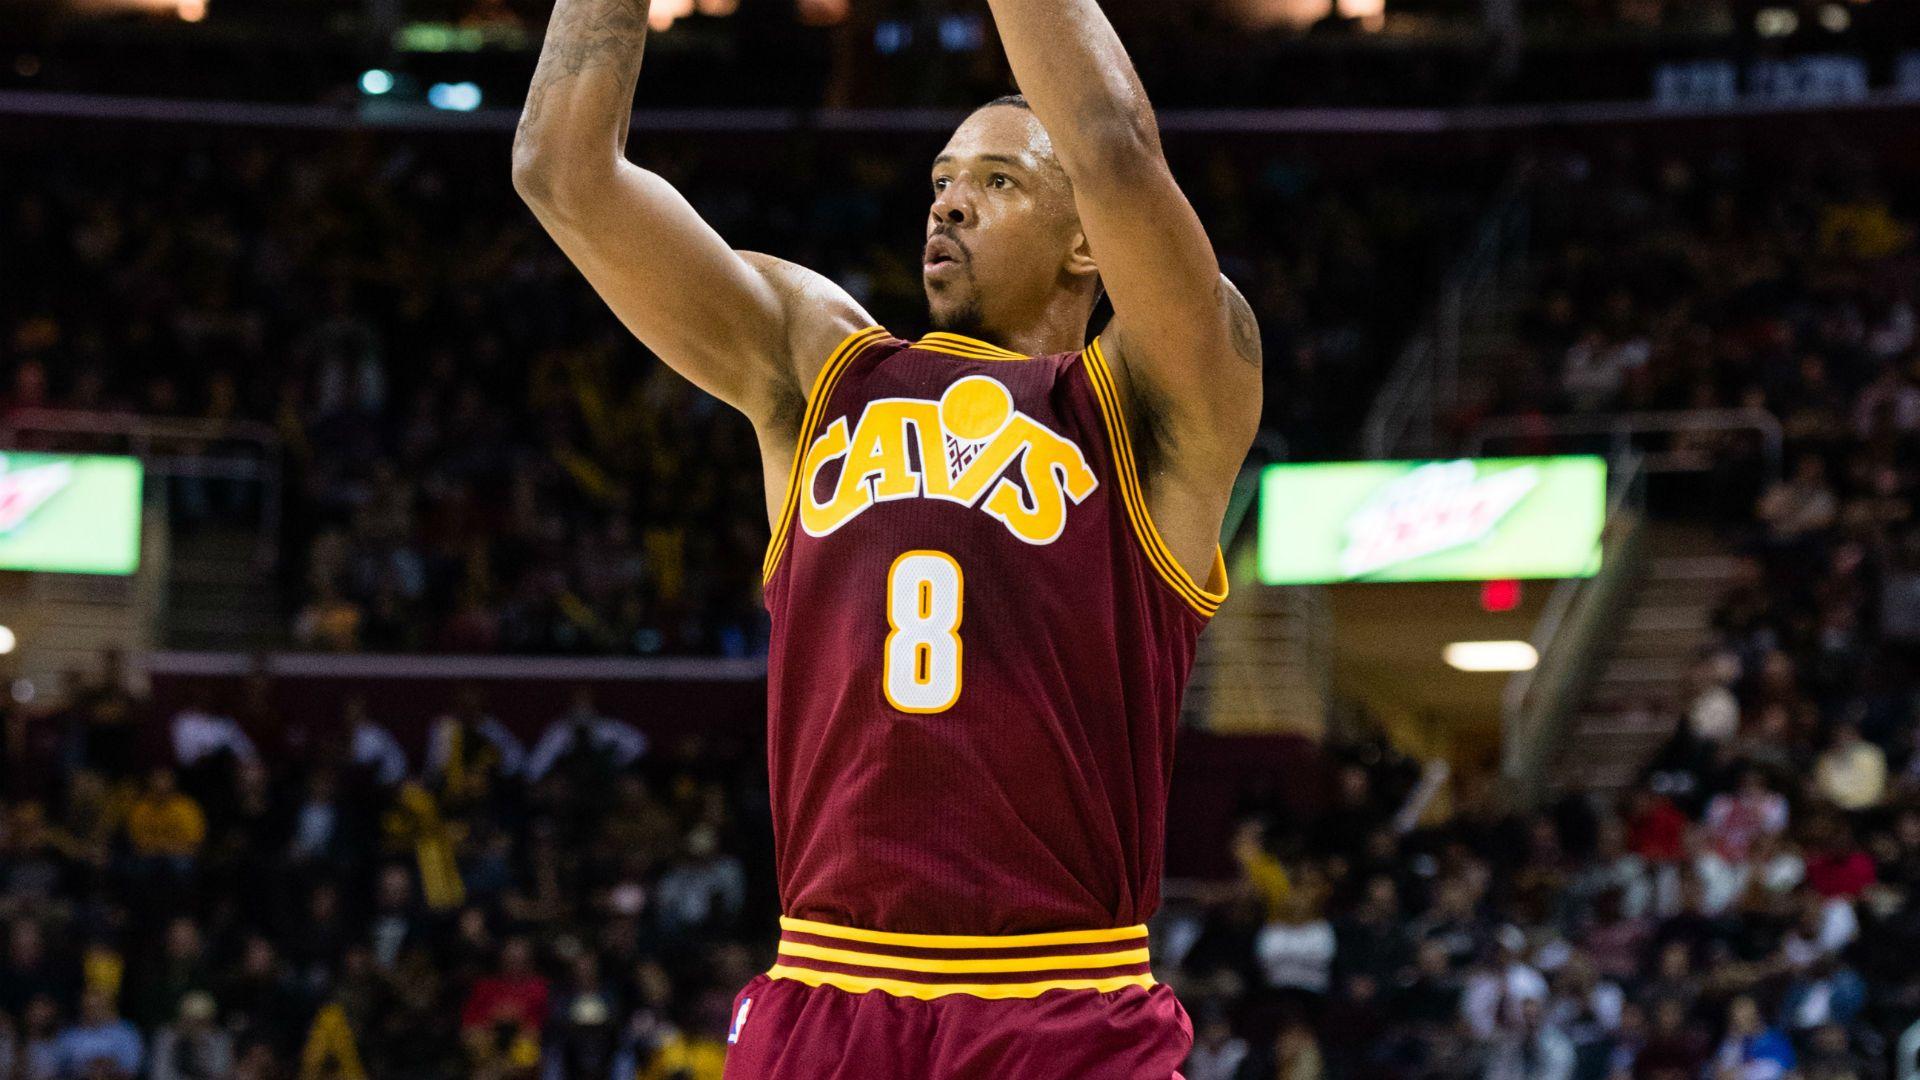 Channing Frye out indefinitely following death of father. NBA